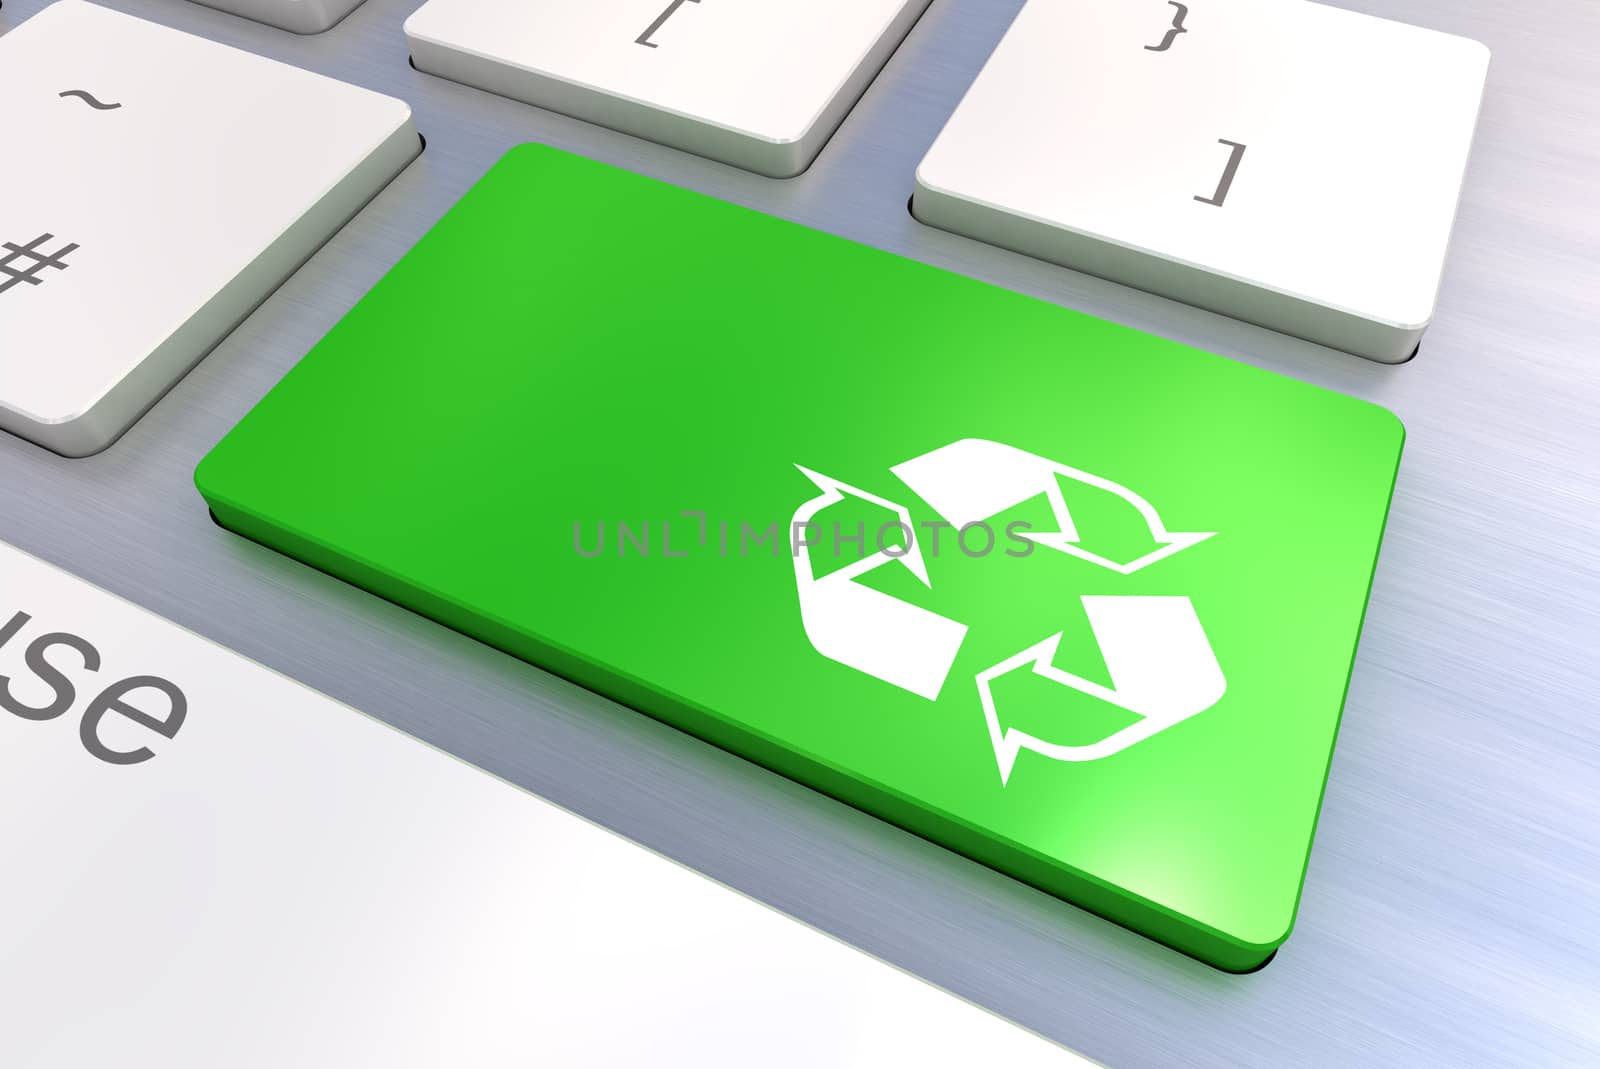 A Colourful 3d Rendered Illustration showing a Recycle Concept on a Computer Keyboard